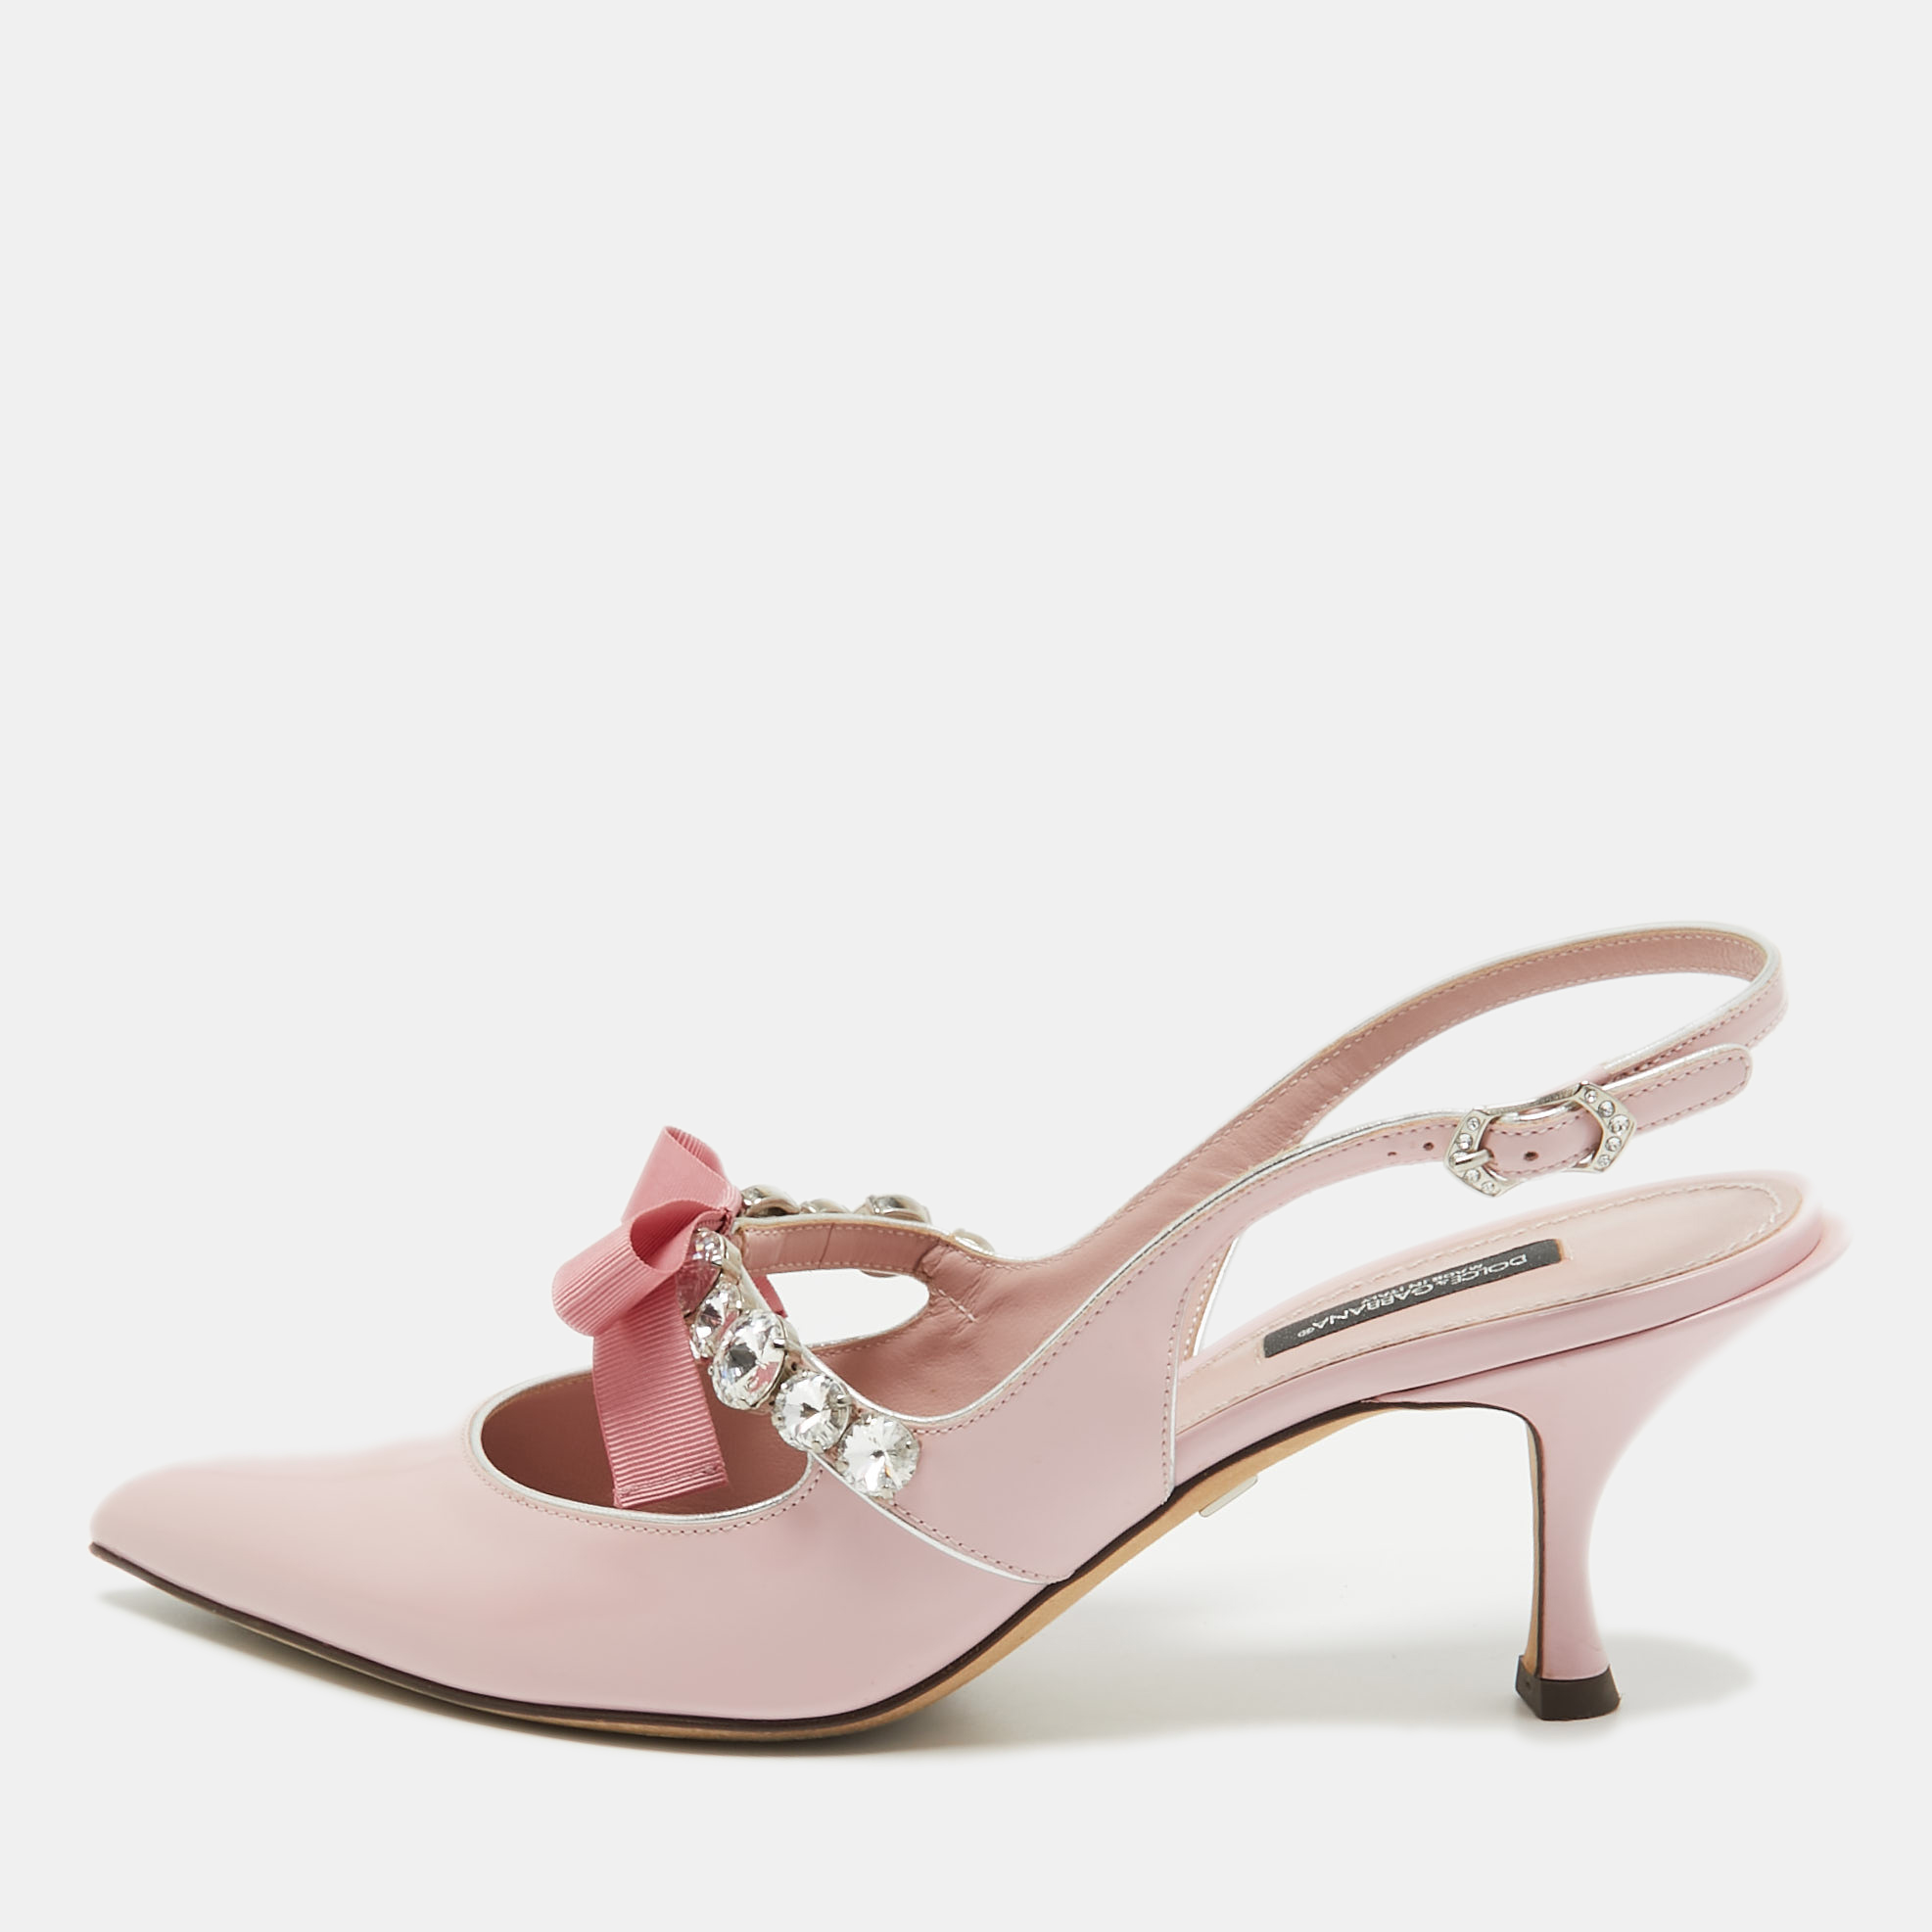 Pre-owned Dolce & Gabbana Pink Patent Leather Crystal Embellished Bow Slingback Pumps Size 40